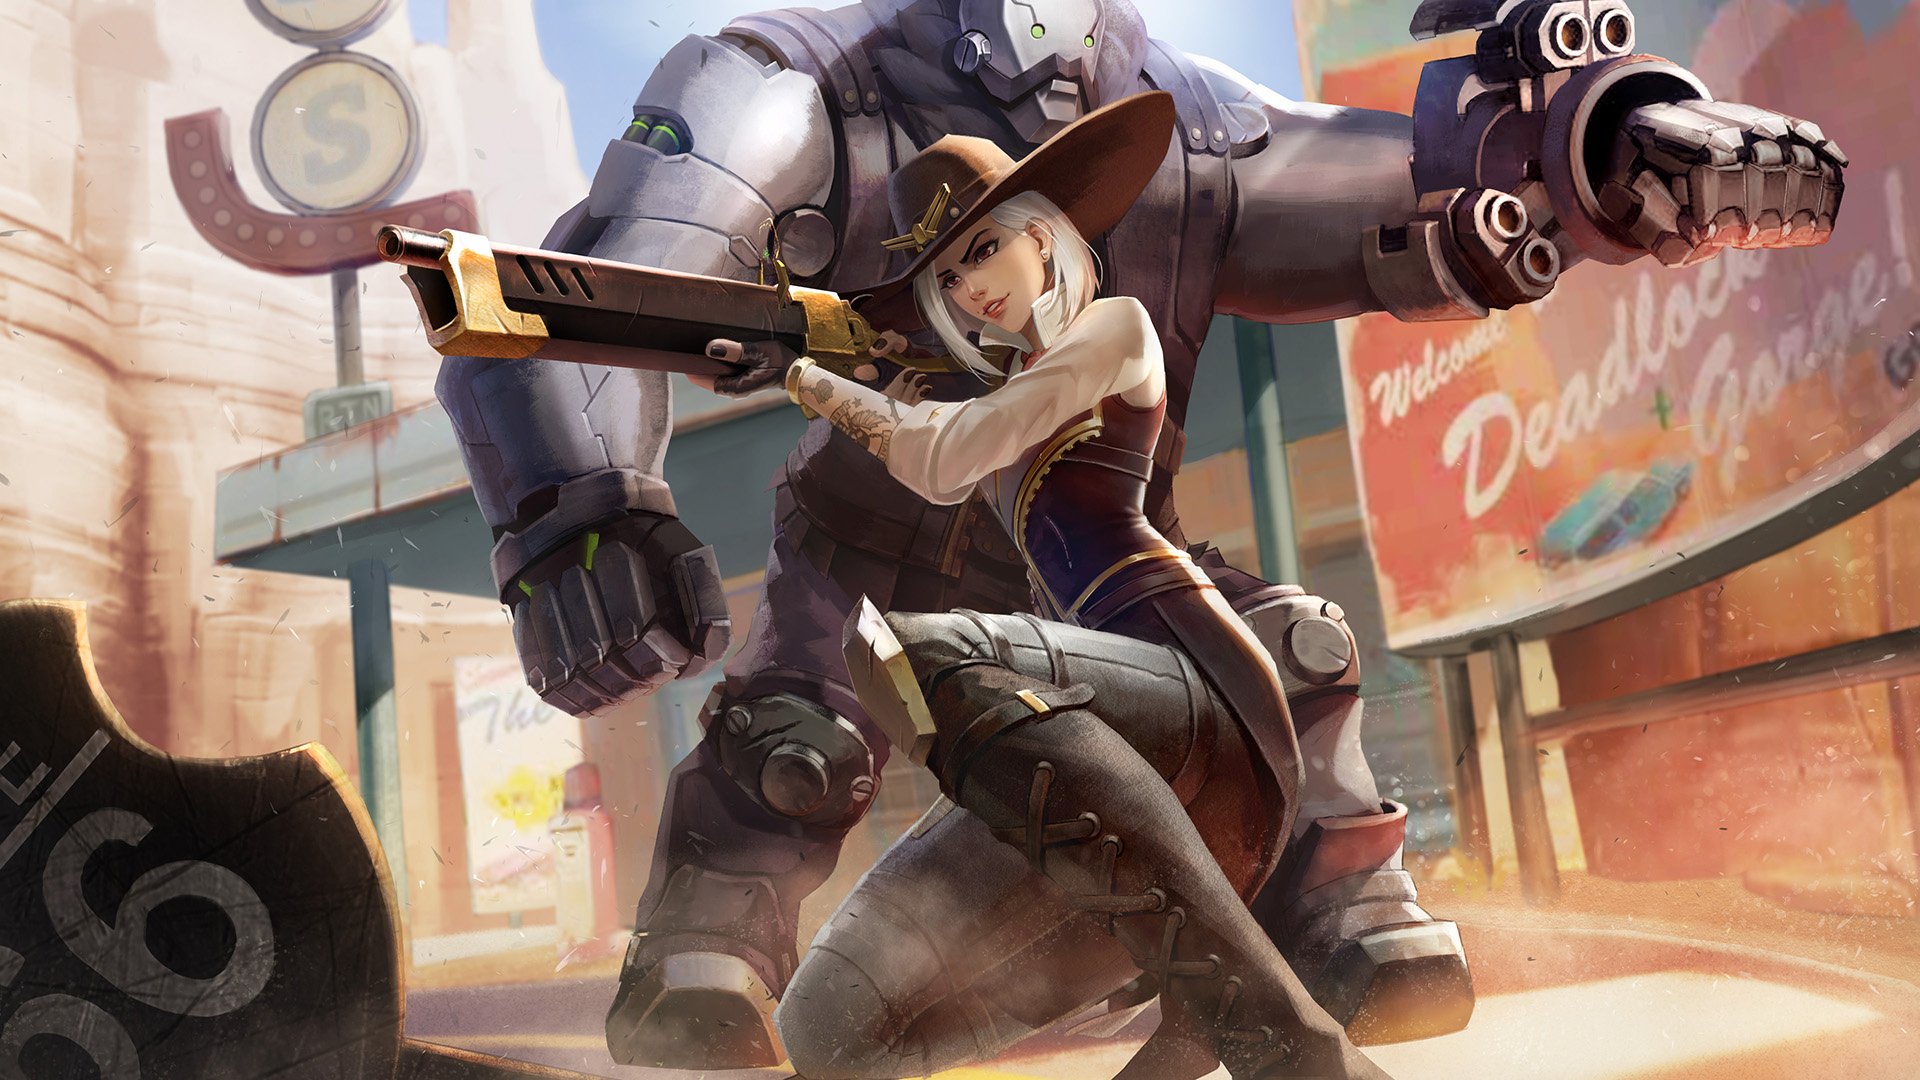 Ashe Overwatch Hd Wallpaper Background Image 1920x1080